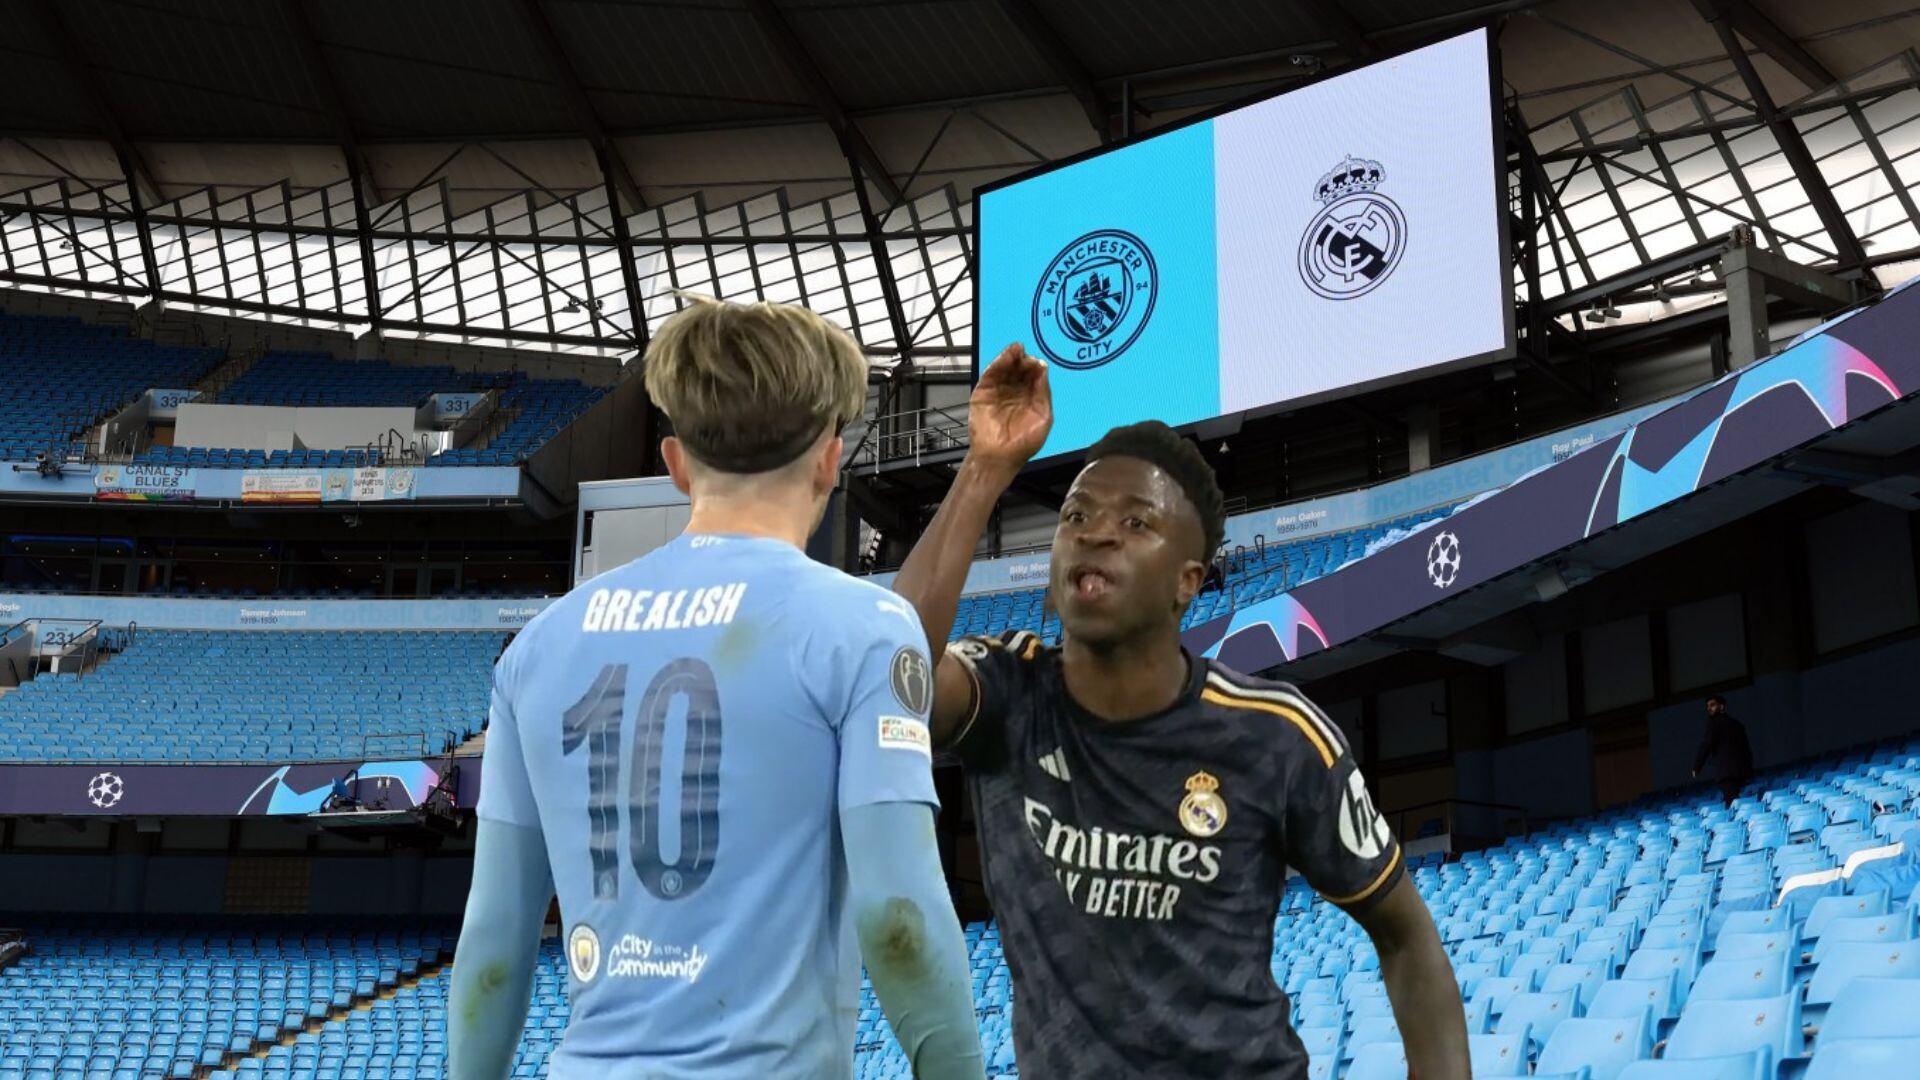 (VIDEO) Vinicius' polemic gesture that angered Grealish at City vs Madrid in Champions, and they say he doesn't provoke